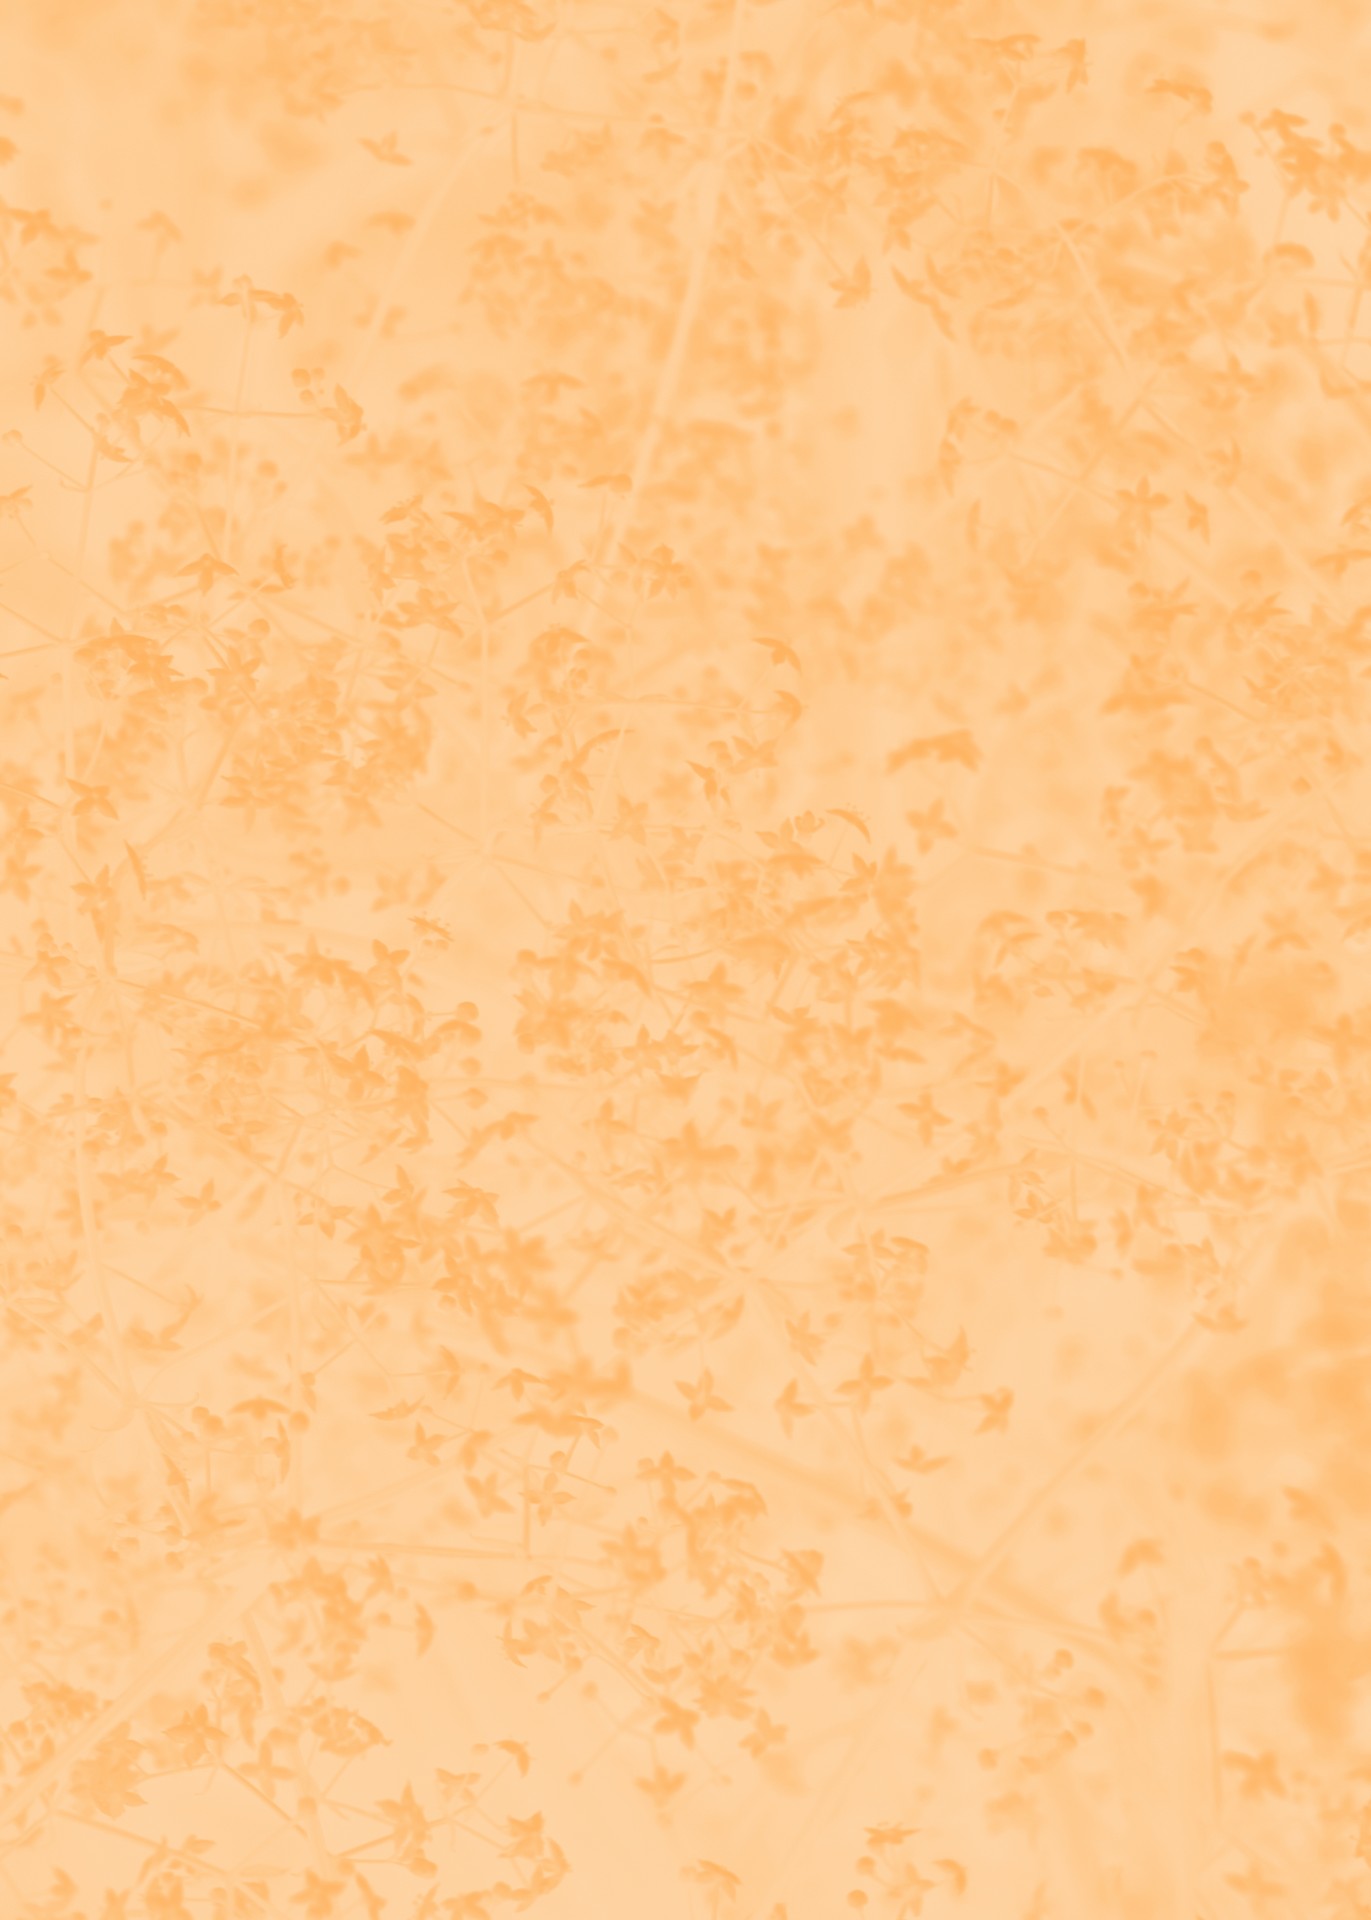 soft floral background orange - Your premium download is greatly appreciated – enjoy!